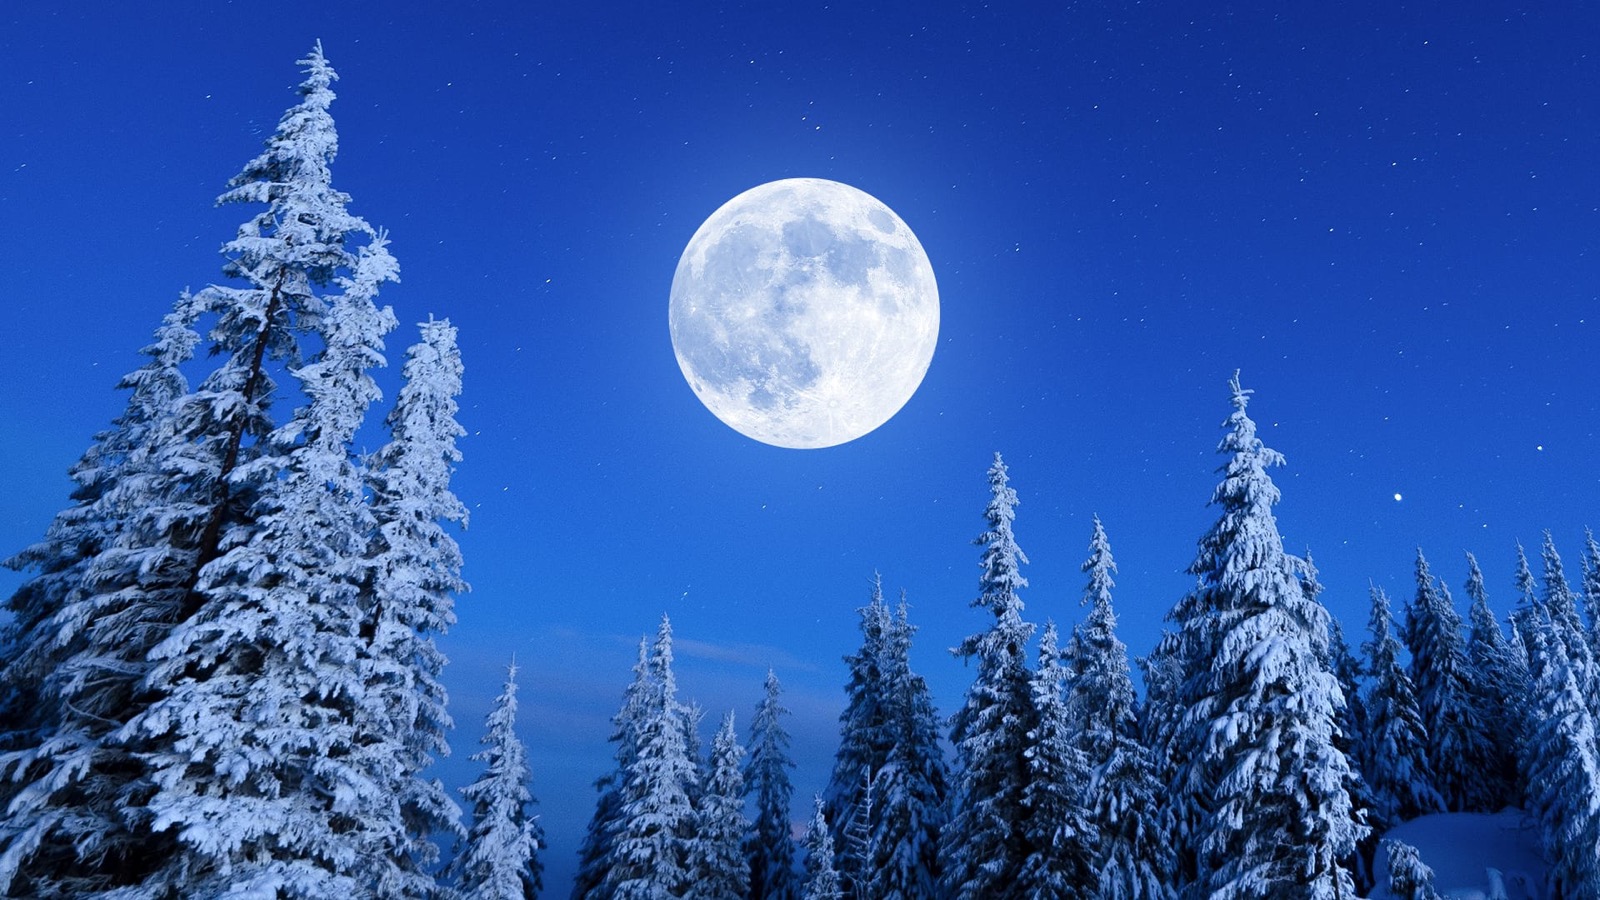 Chinese New Year Trivia Questions And Answers Full moon in winter